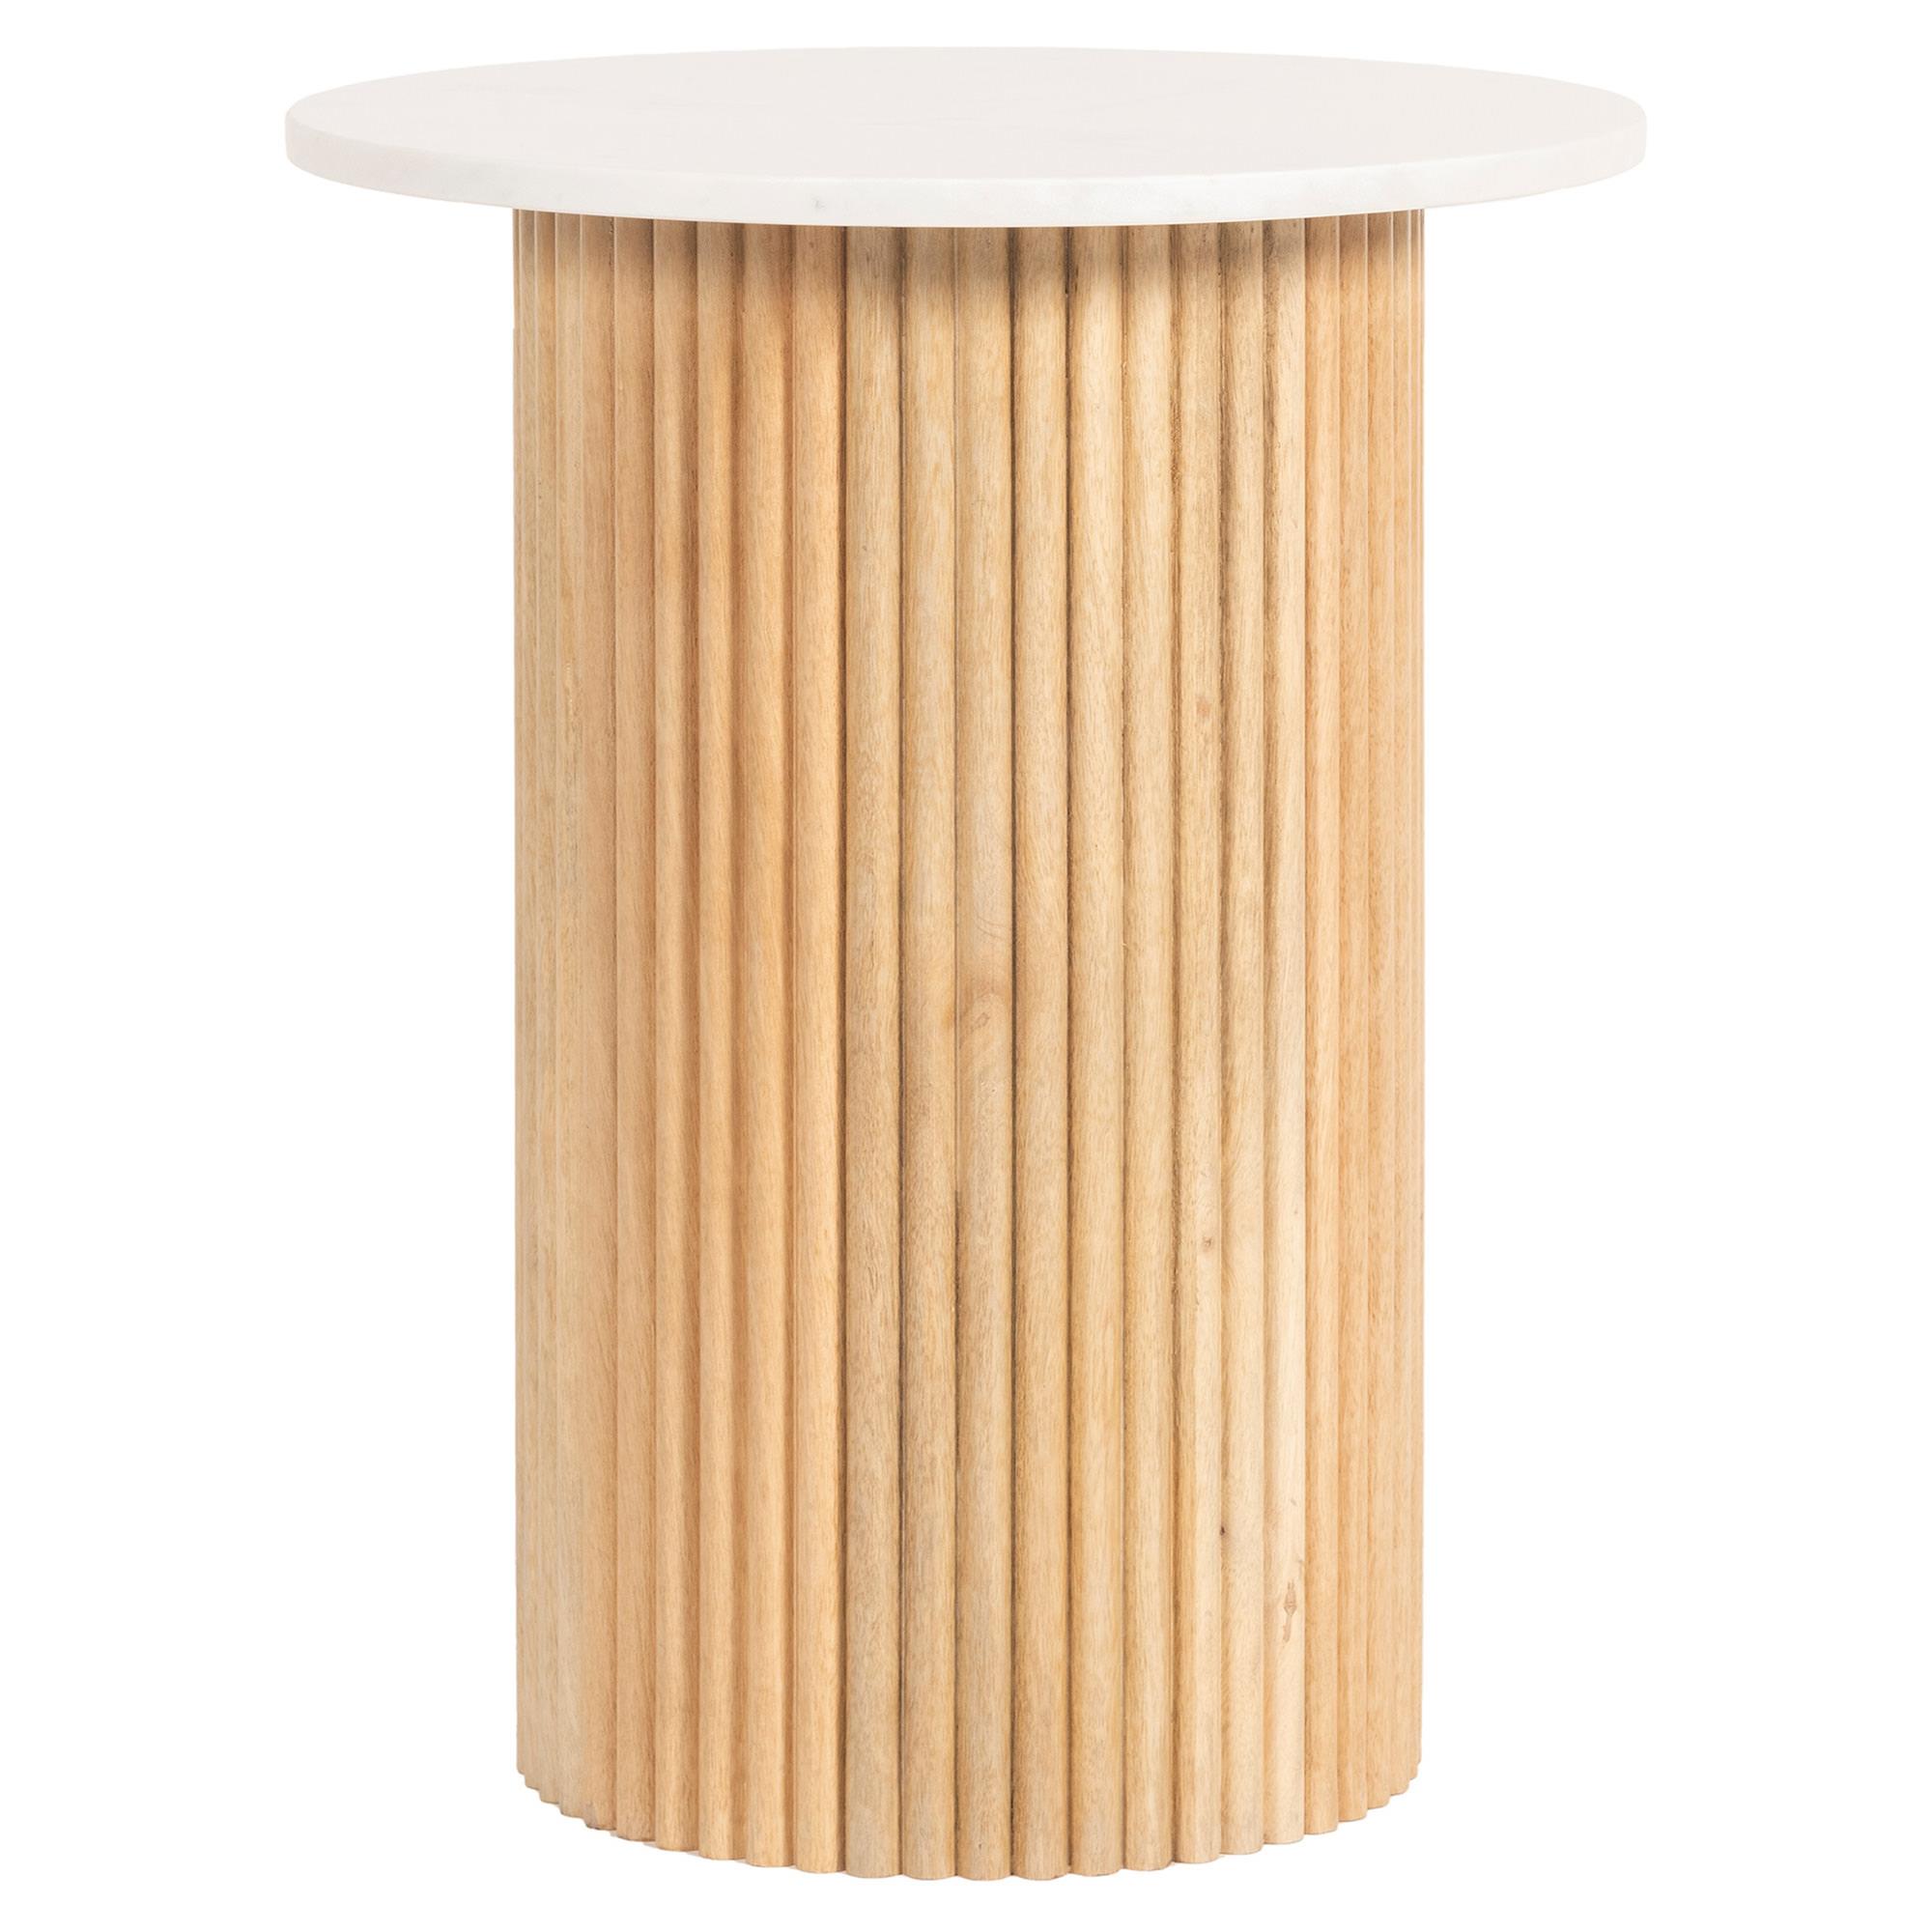 Paloma Marble & Timber Round Side Table, White / Natural